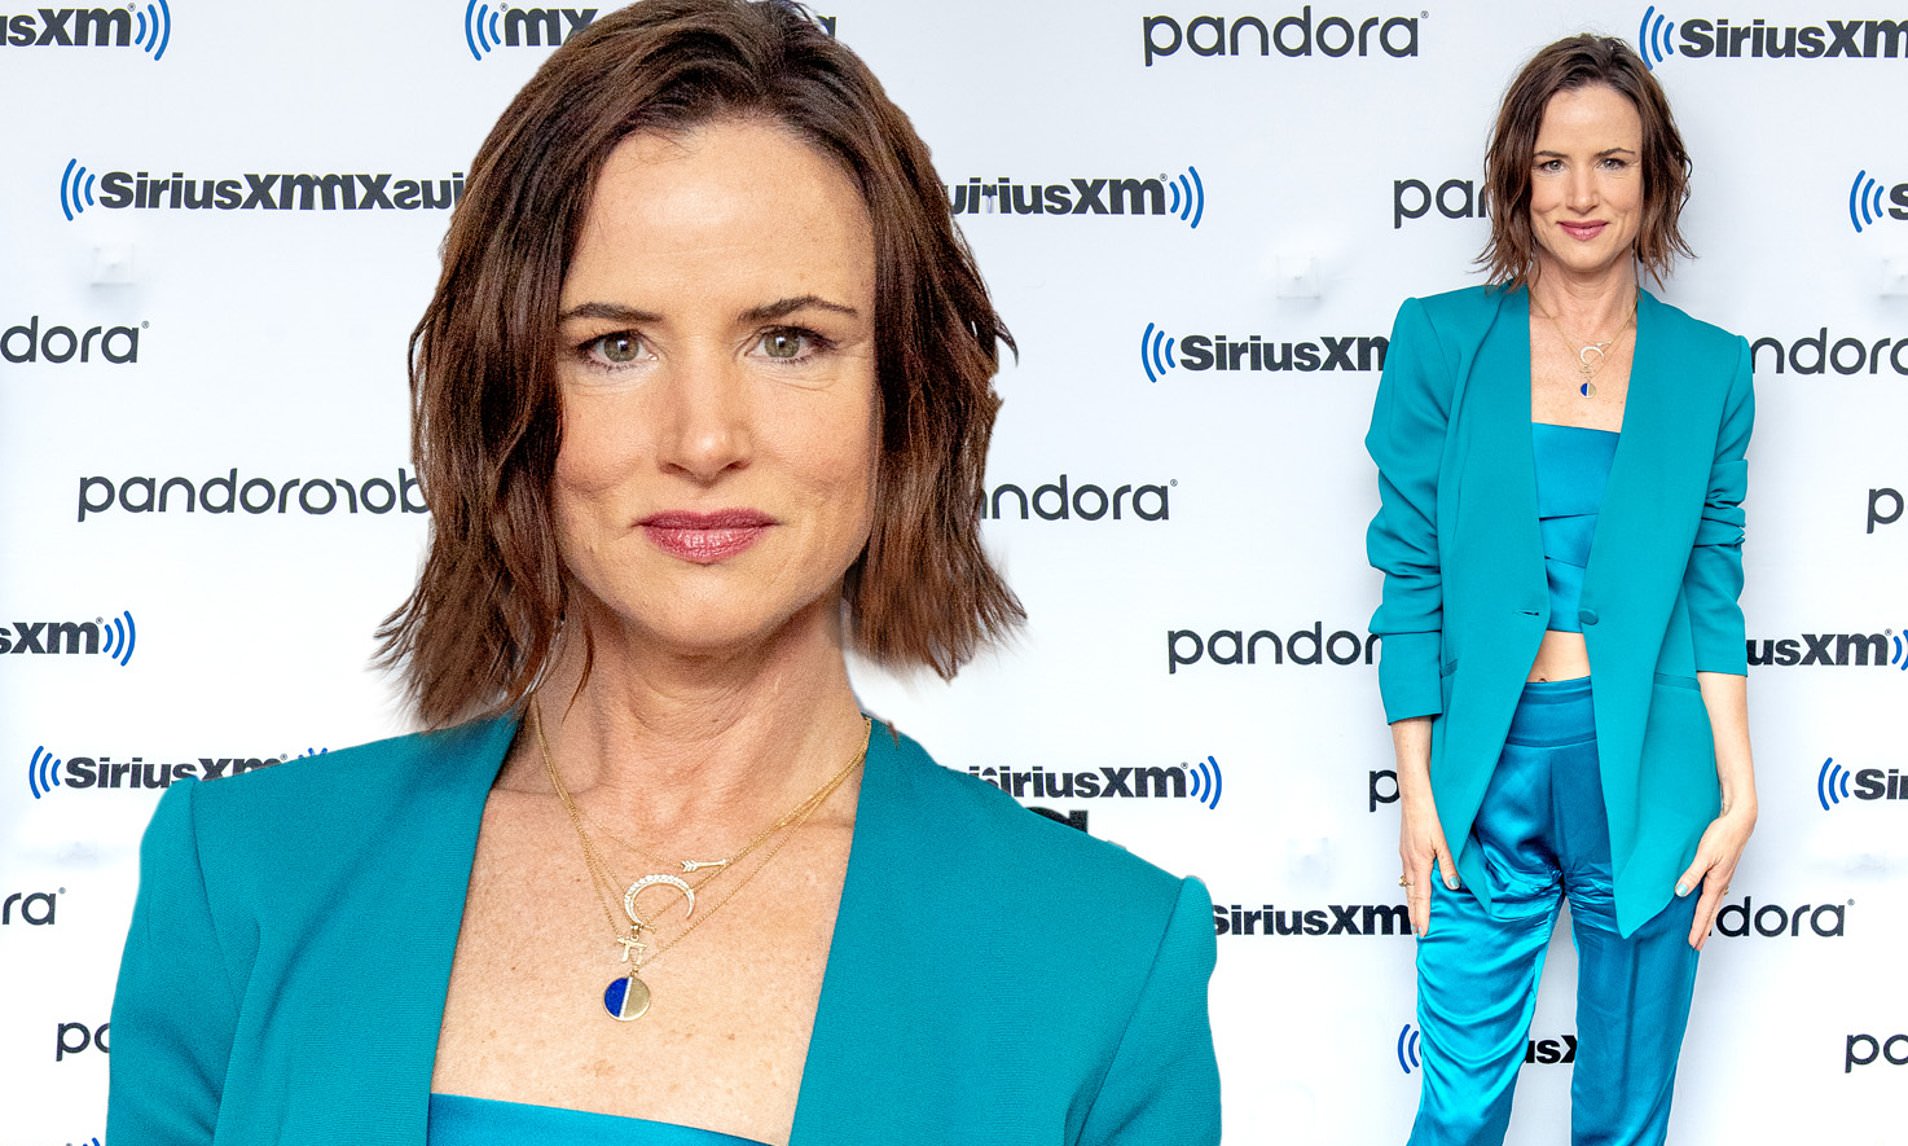 Juliette Lewis looks lovely in teal as she steps out to promote Season 2 of Facebook Watch’s Sacred Lies